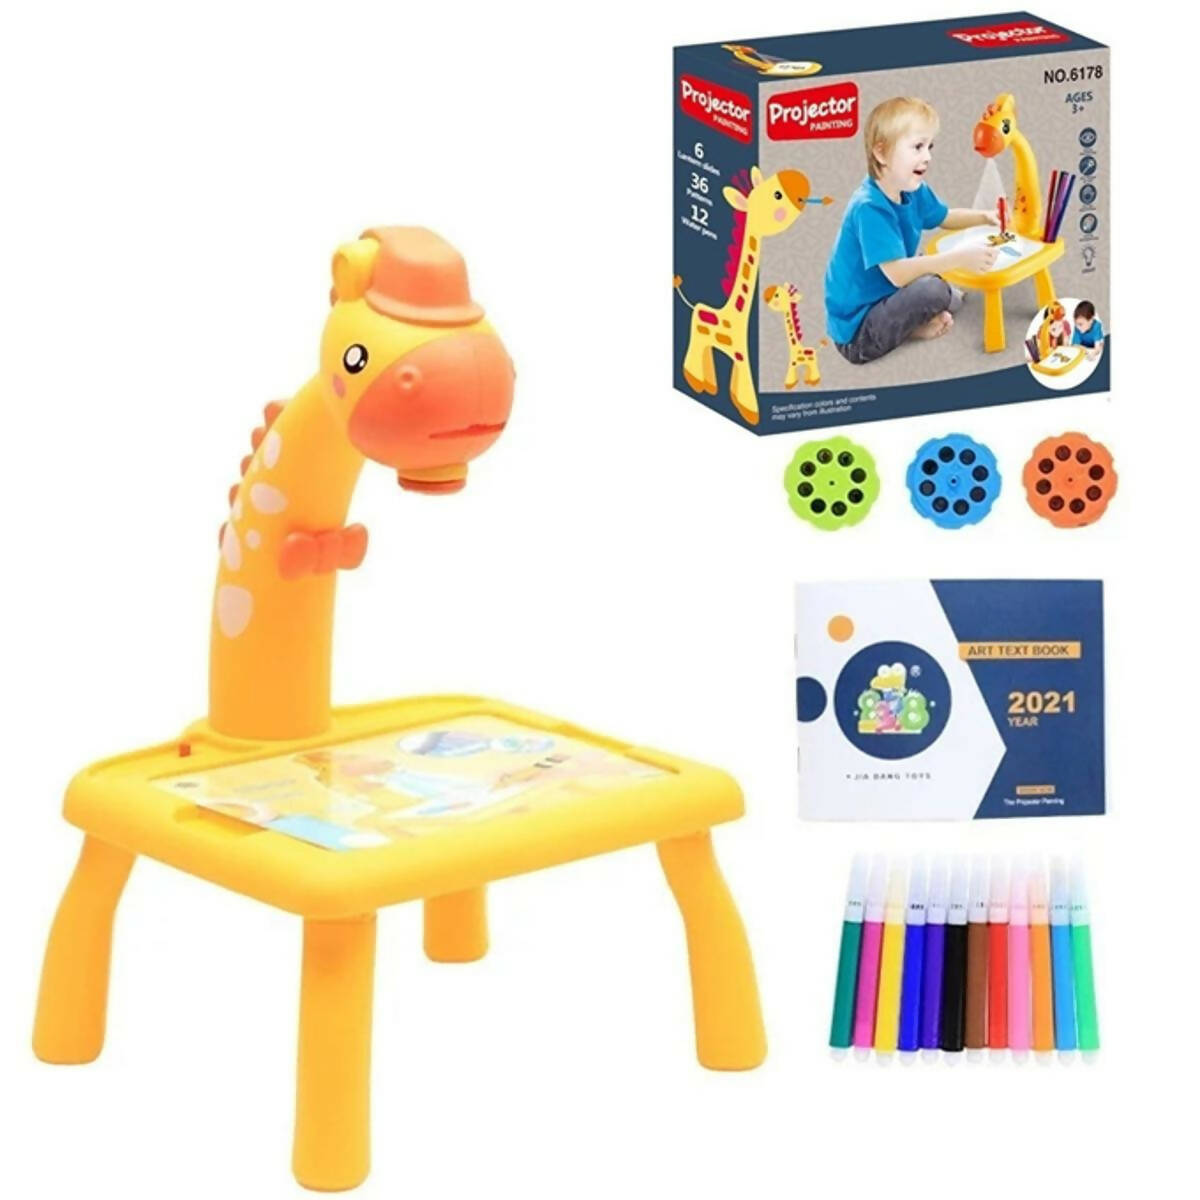 LED Giraffe Projector Painting Set for Kids – Yellow